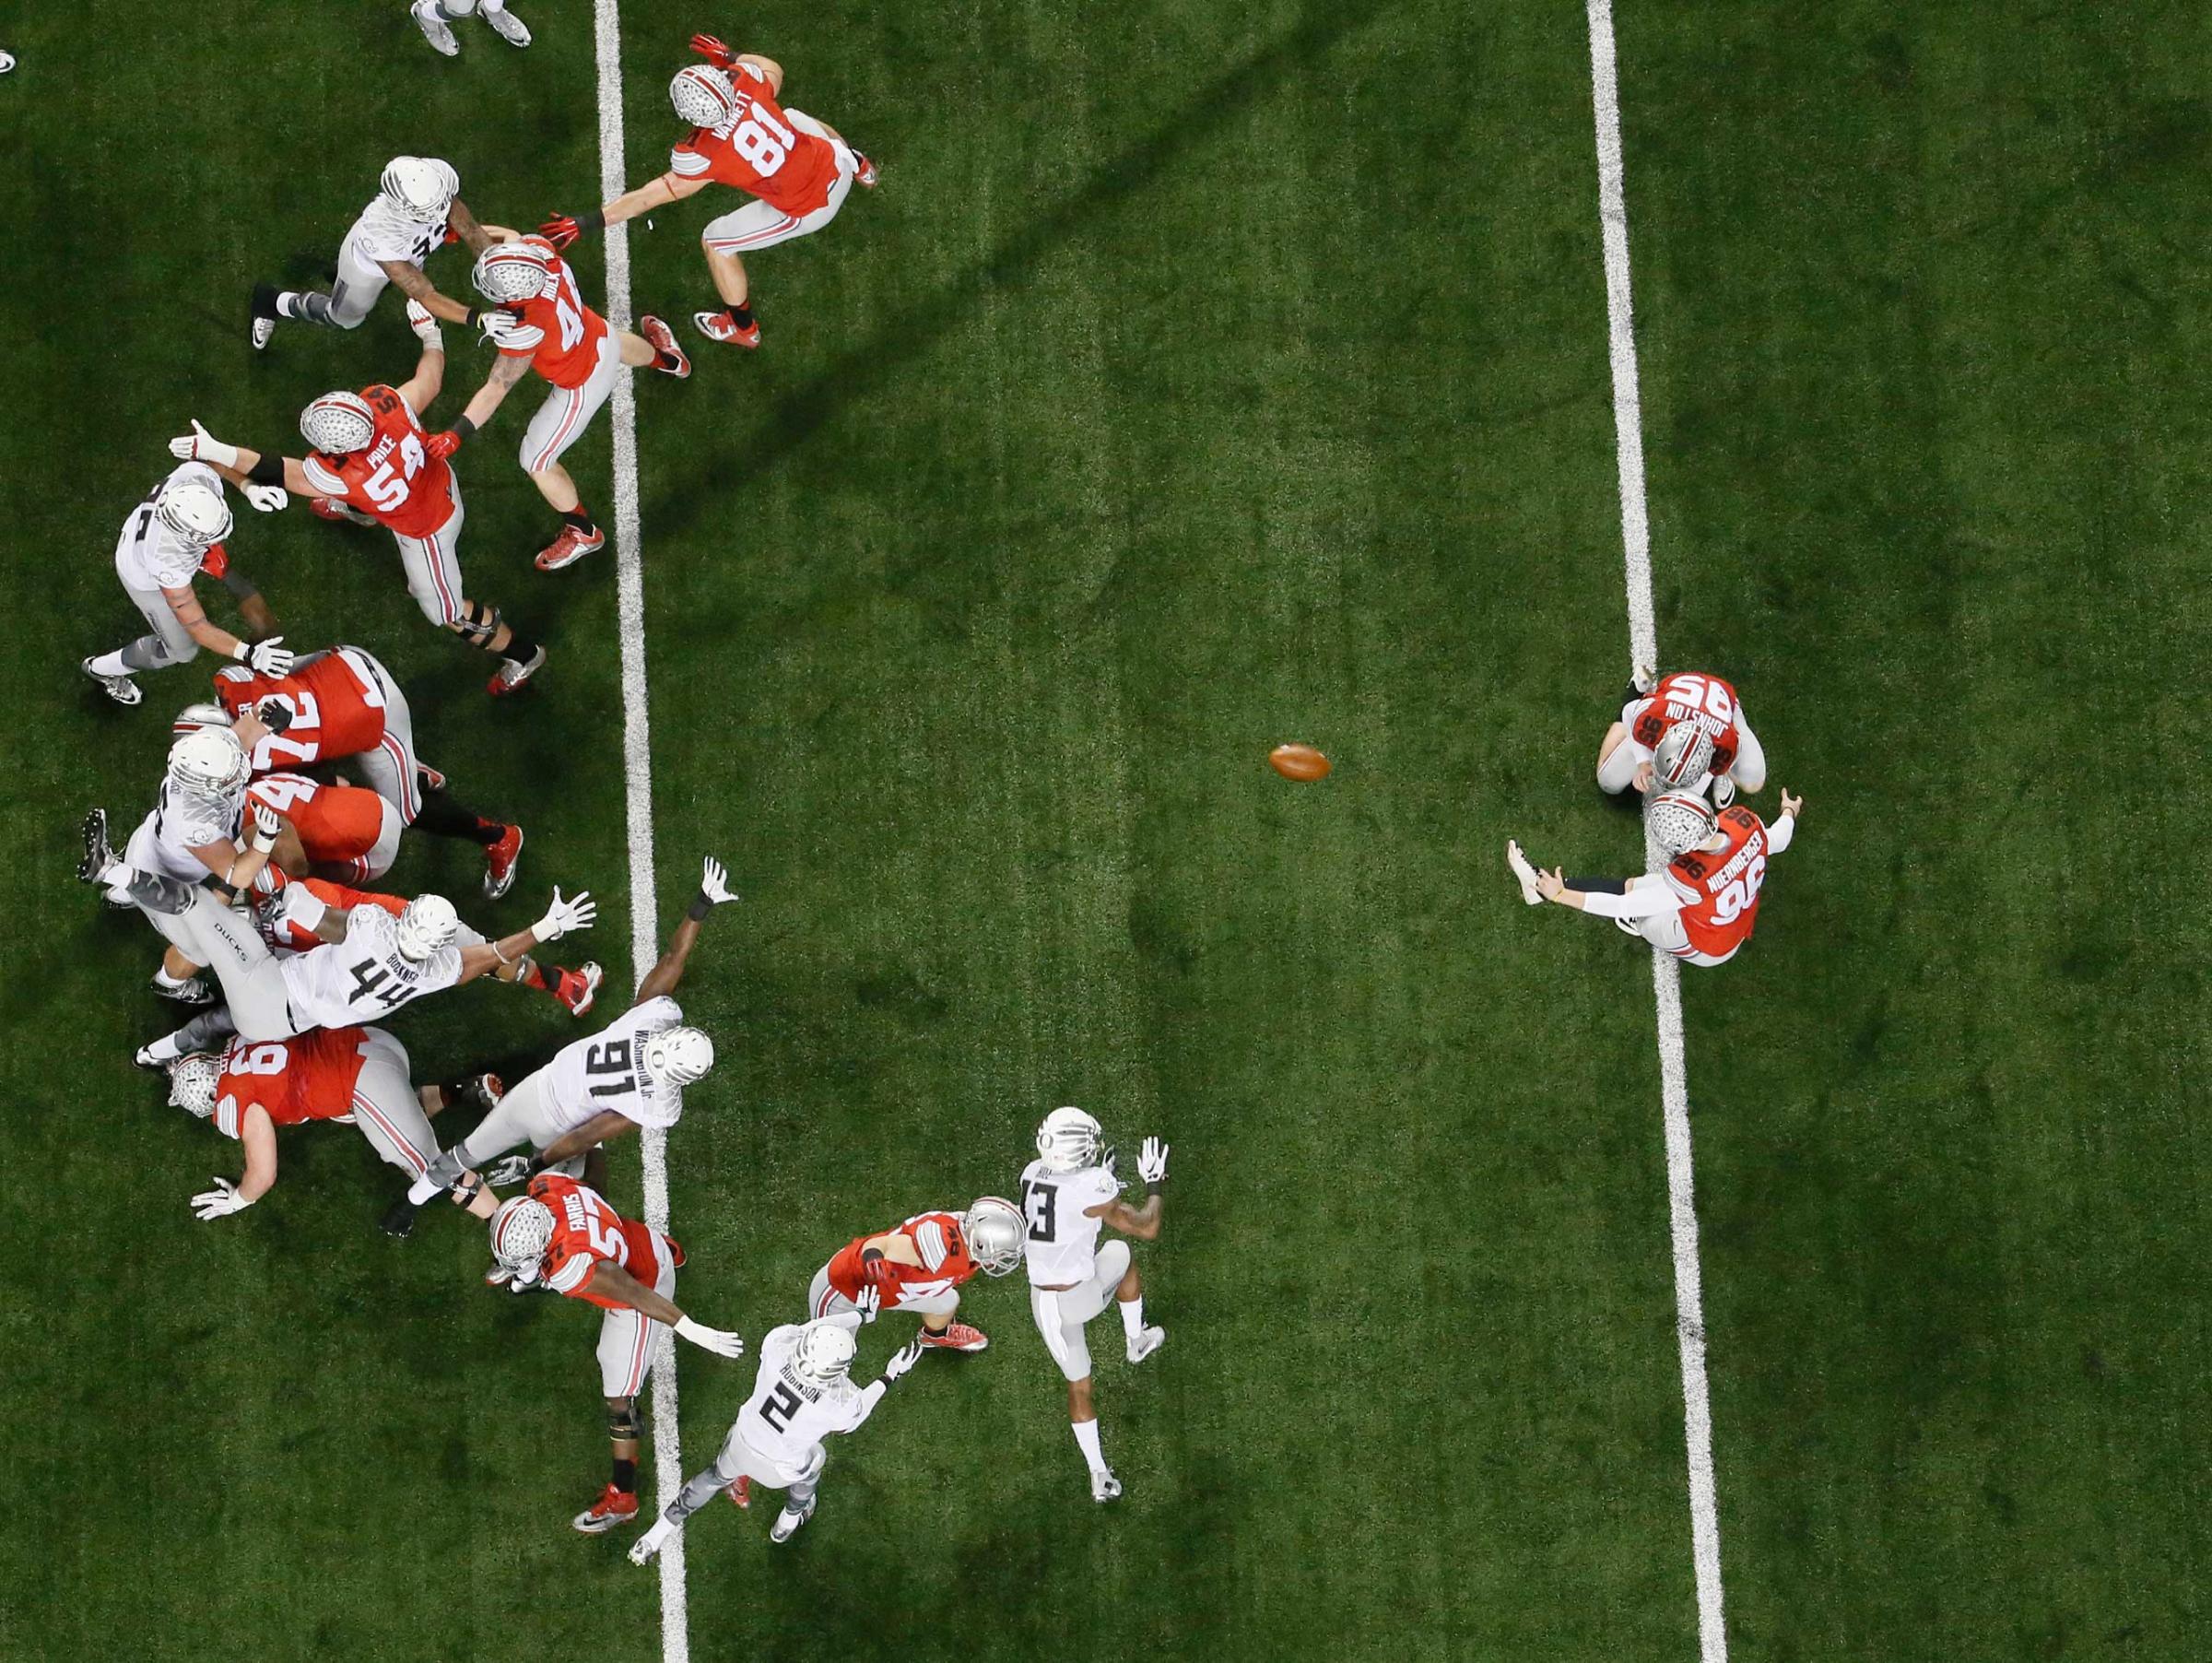 Ohio State place kicker Sean Nuernberger (96) kicks an extra point during the NCAA college football playoff championship game against Oregon on Jan. 12, 2015, in Arlington, Texas.